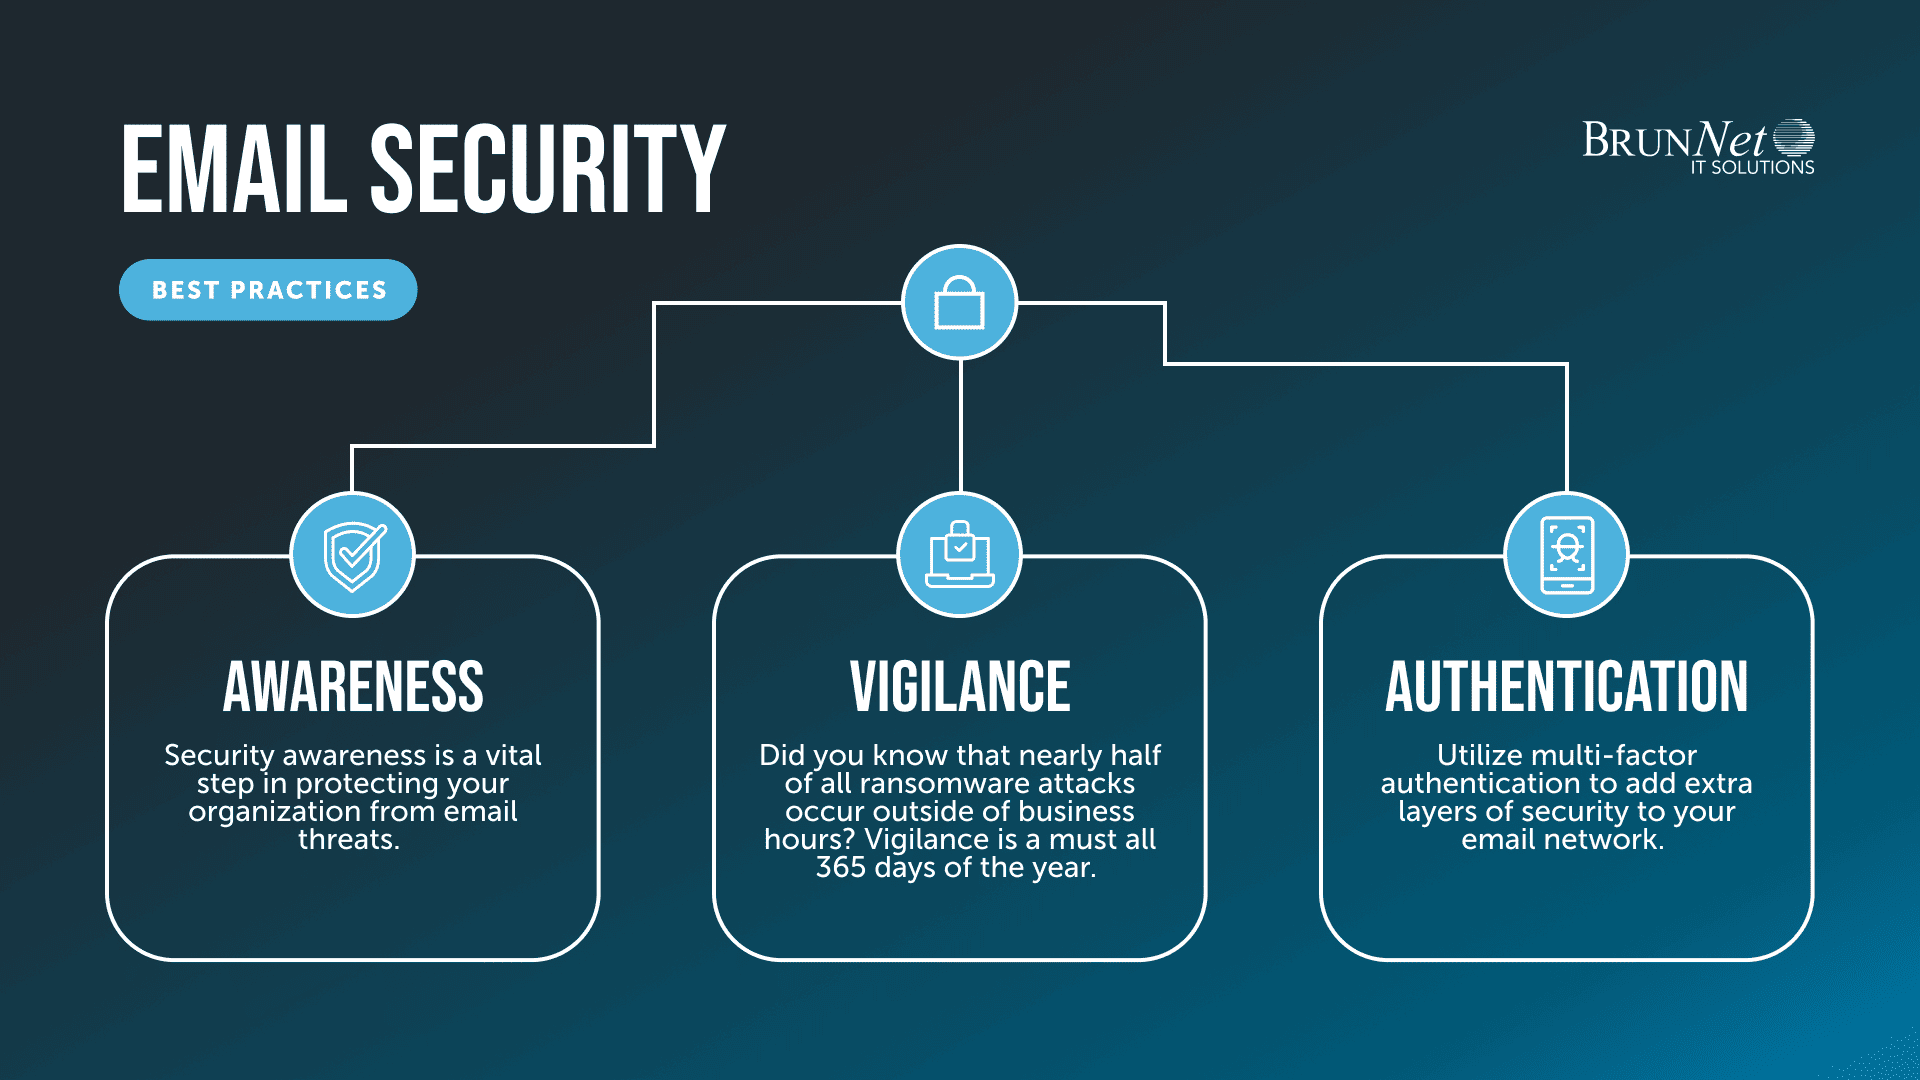 BrunNet Email Security Infographic